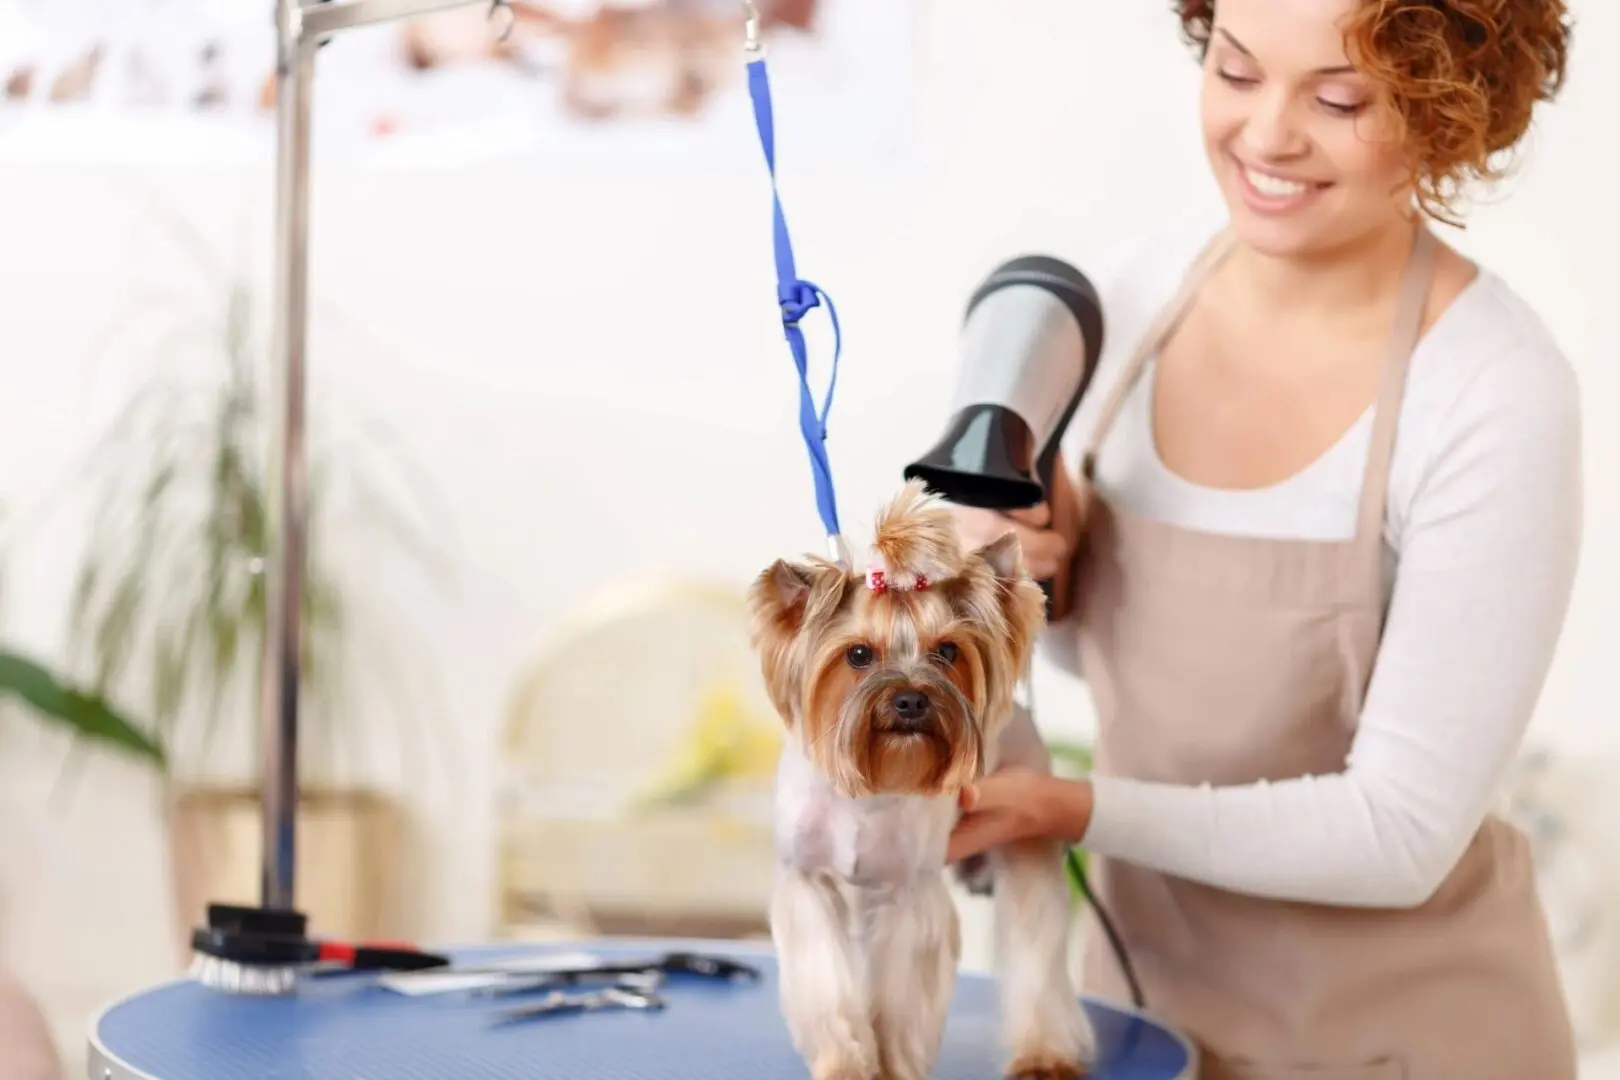 A woman is drying her dog 's hair with a blow dryer.